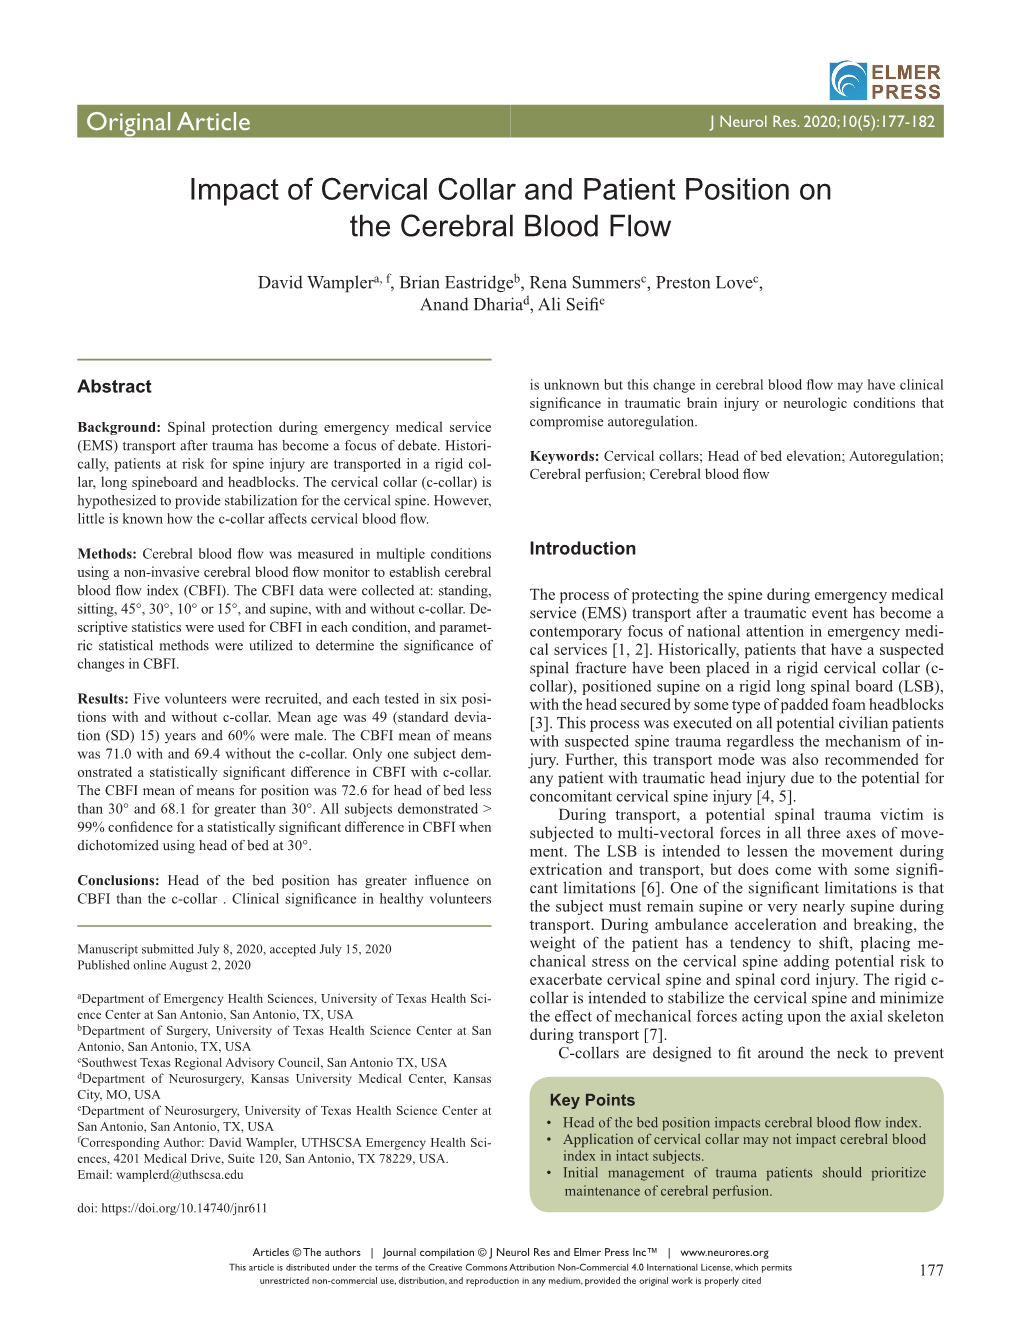 Impact of Cervical Collar and Patient Position on the Cerebral Blood Flow